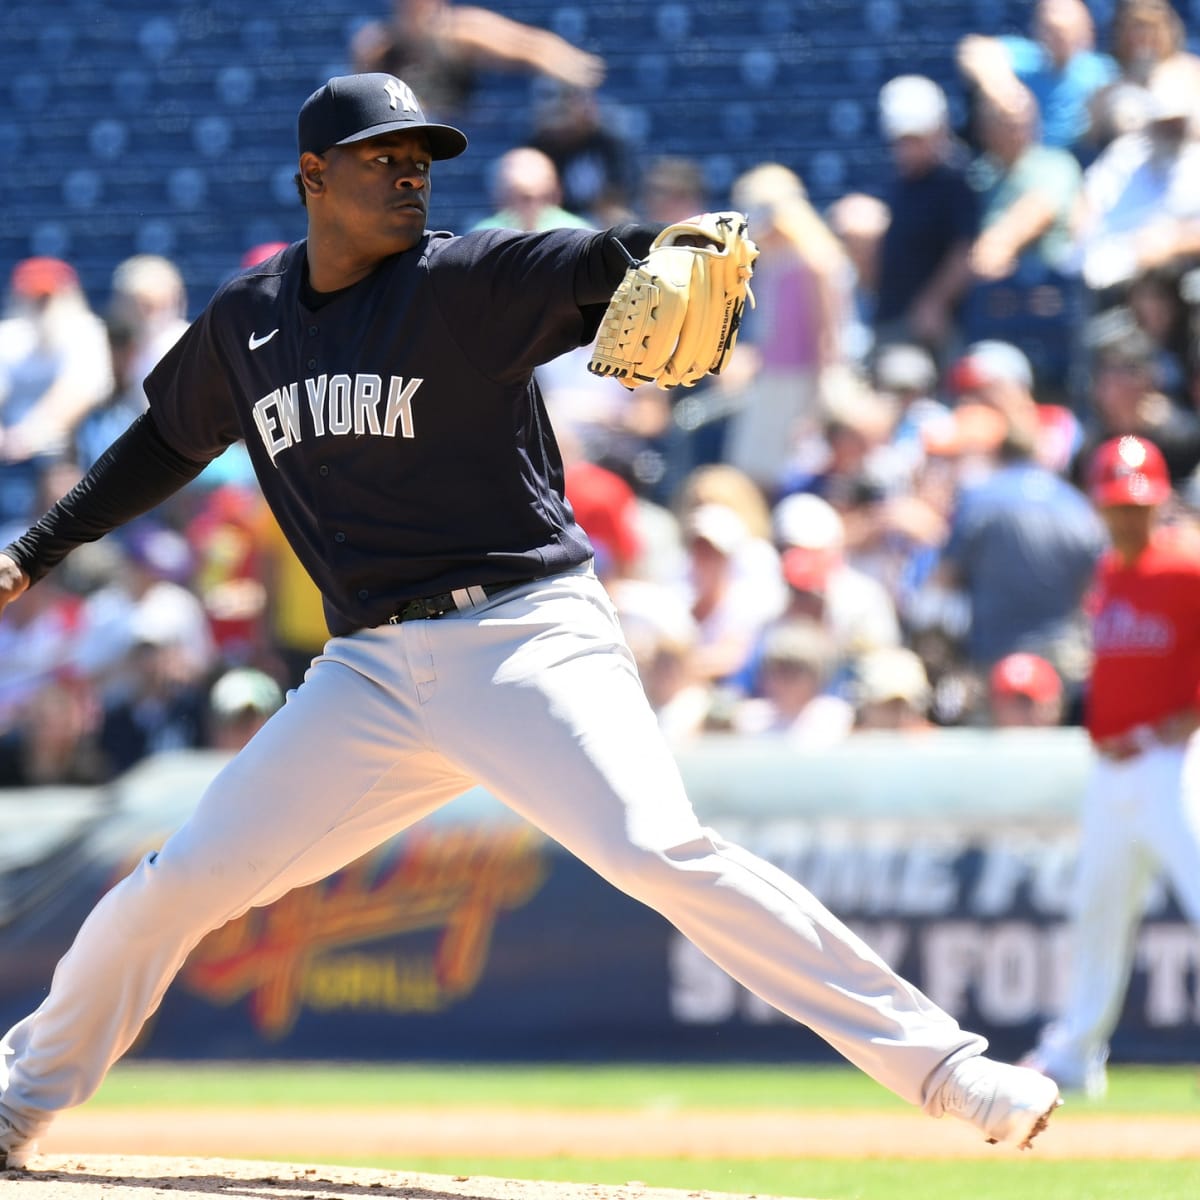 Luis Severino is ins white yankees jersey piring confidence for